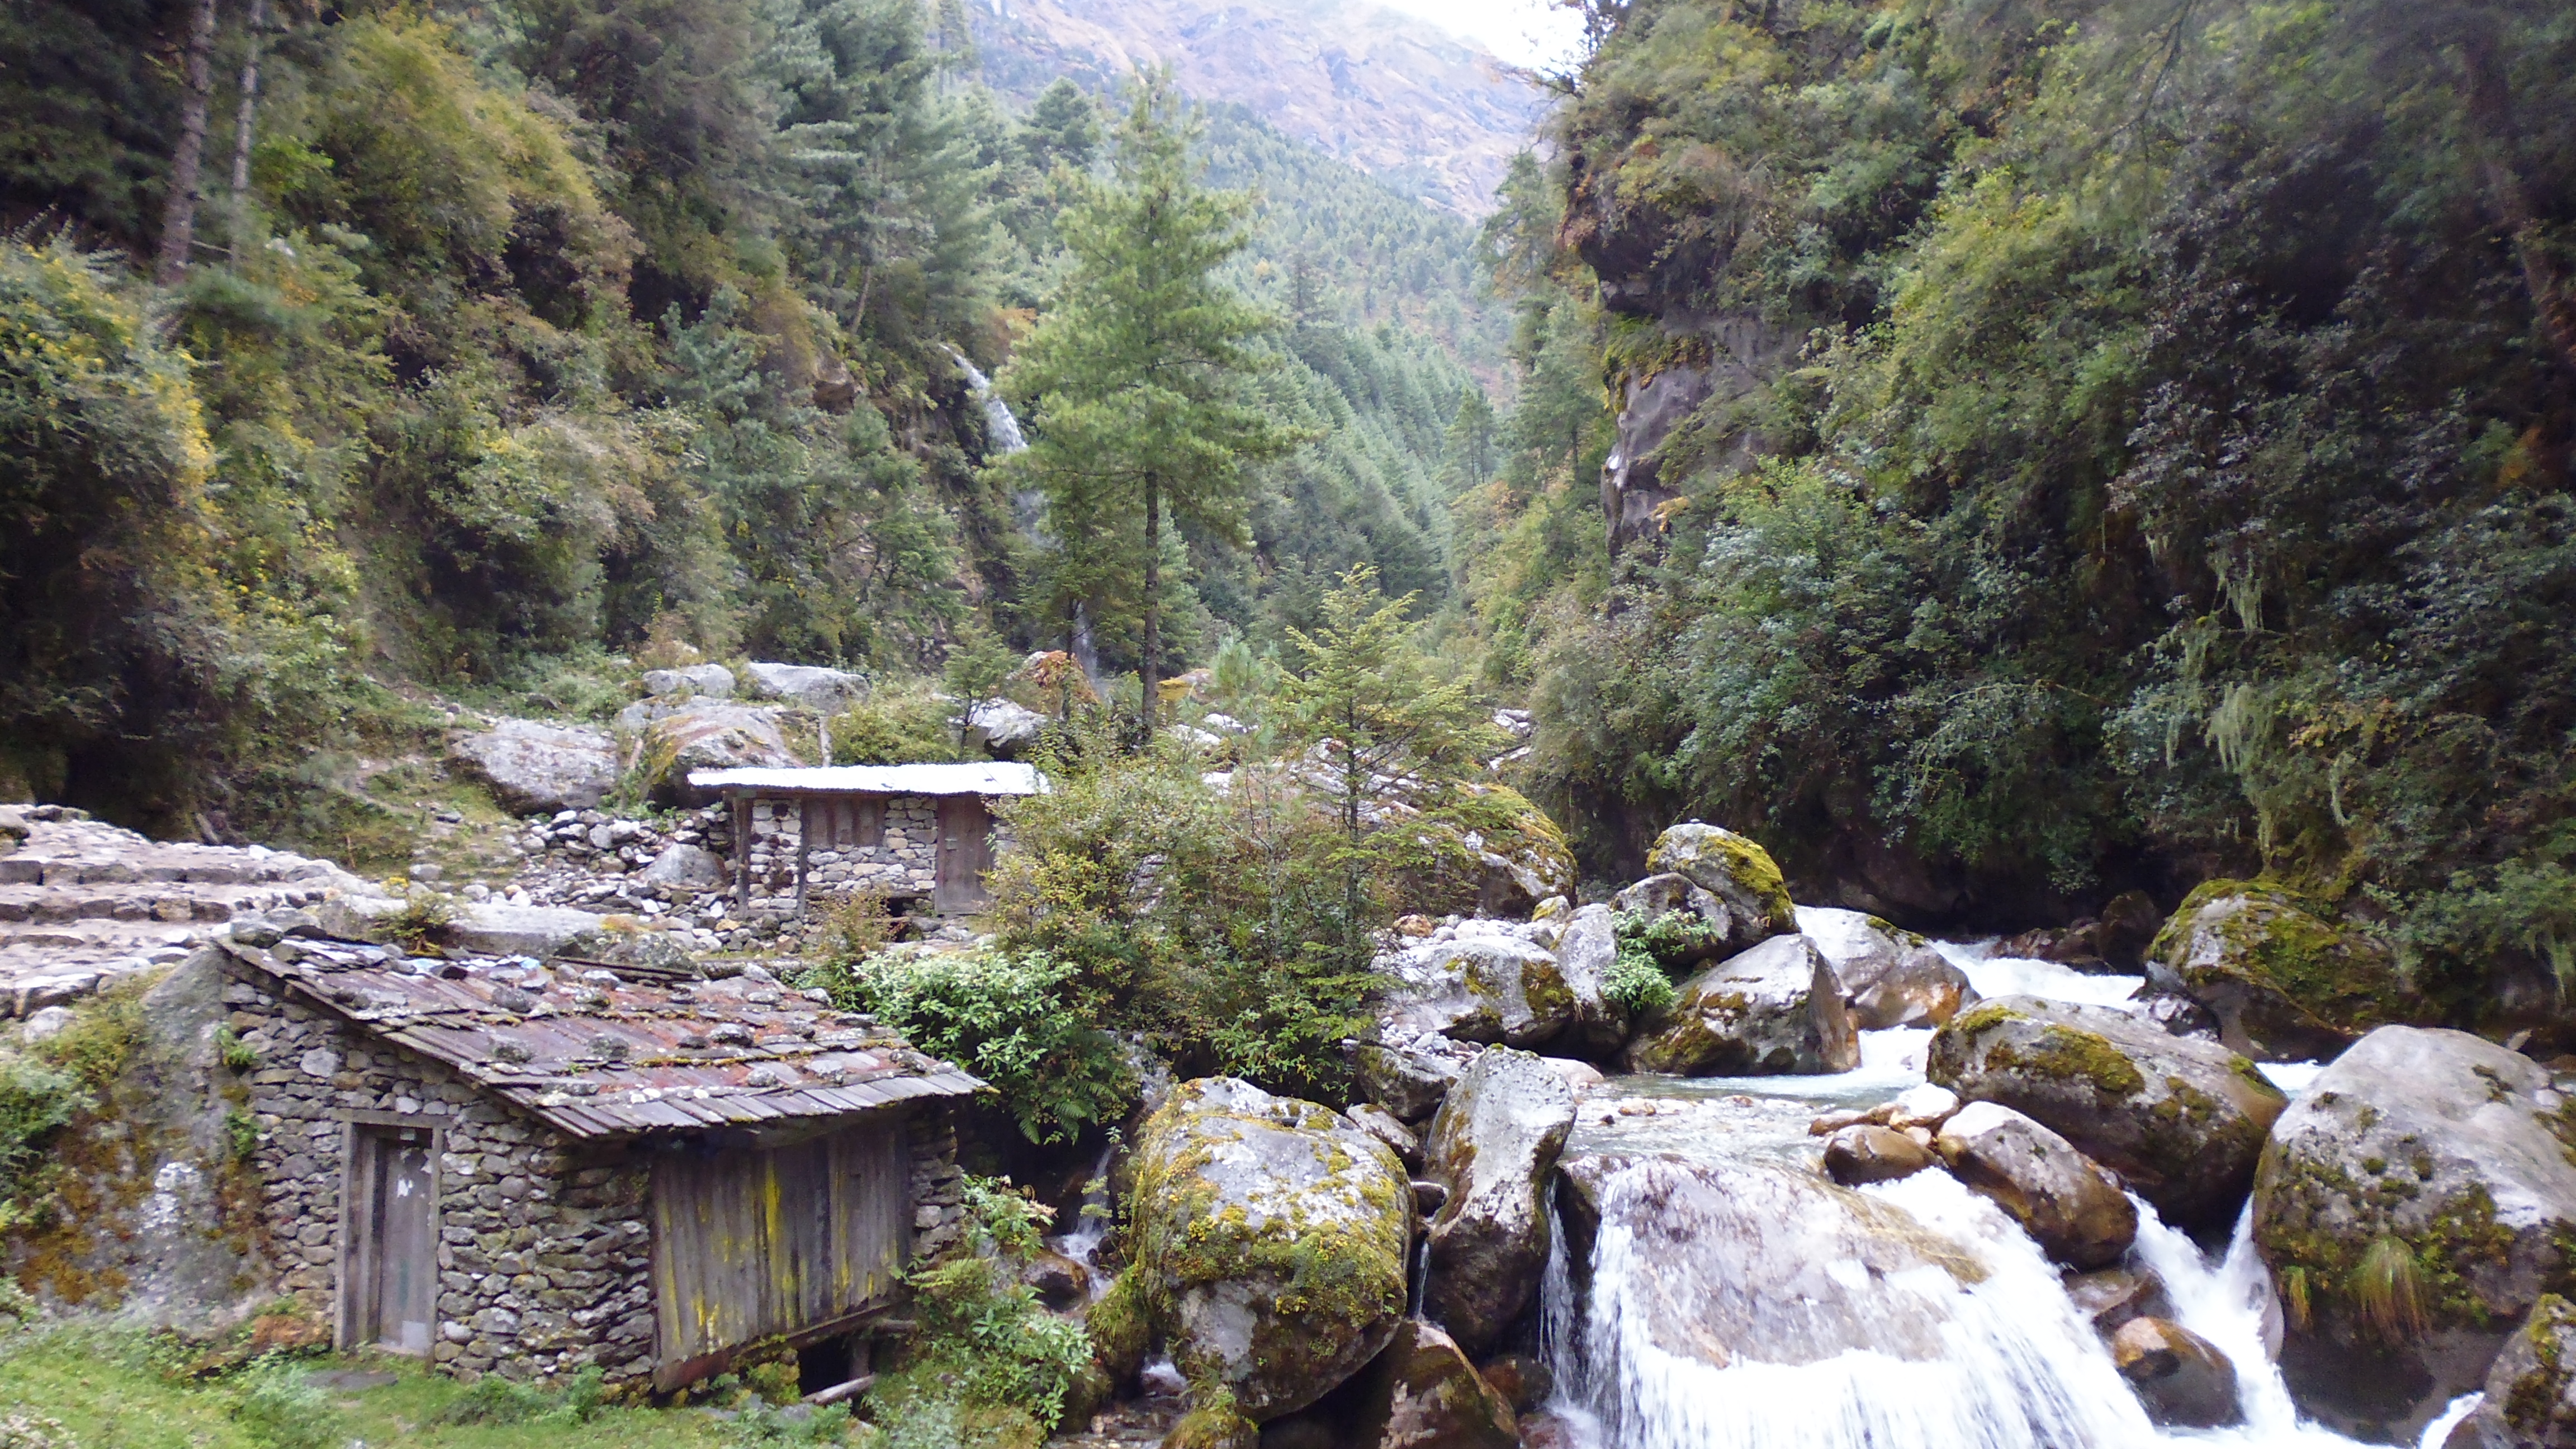 Traditional Cabins Along the Everest Trails.